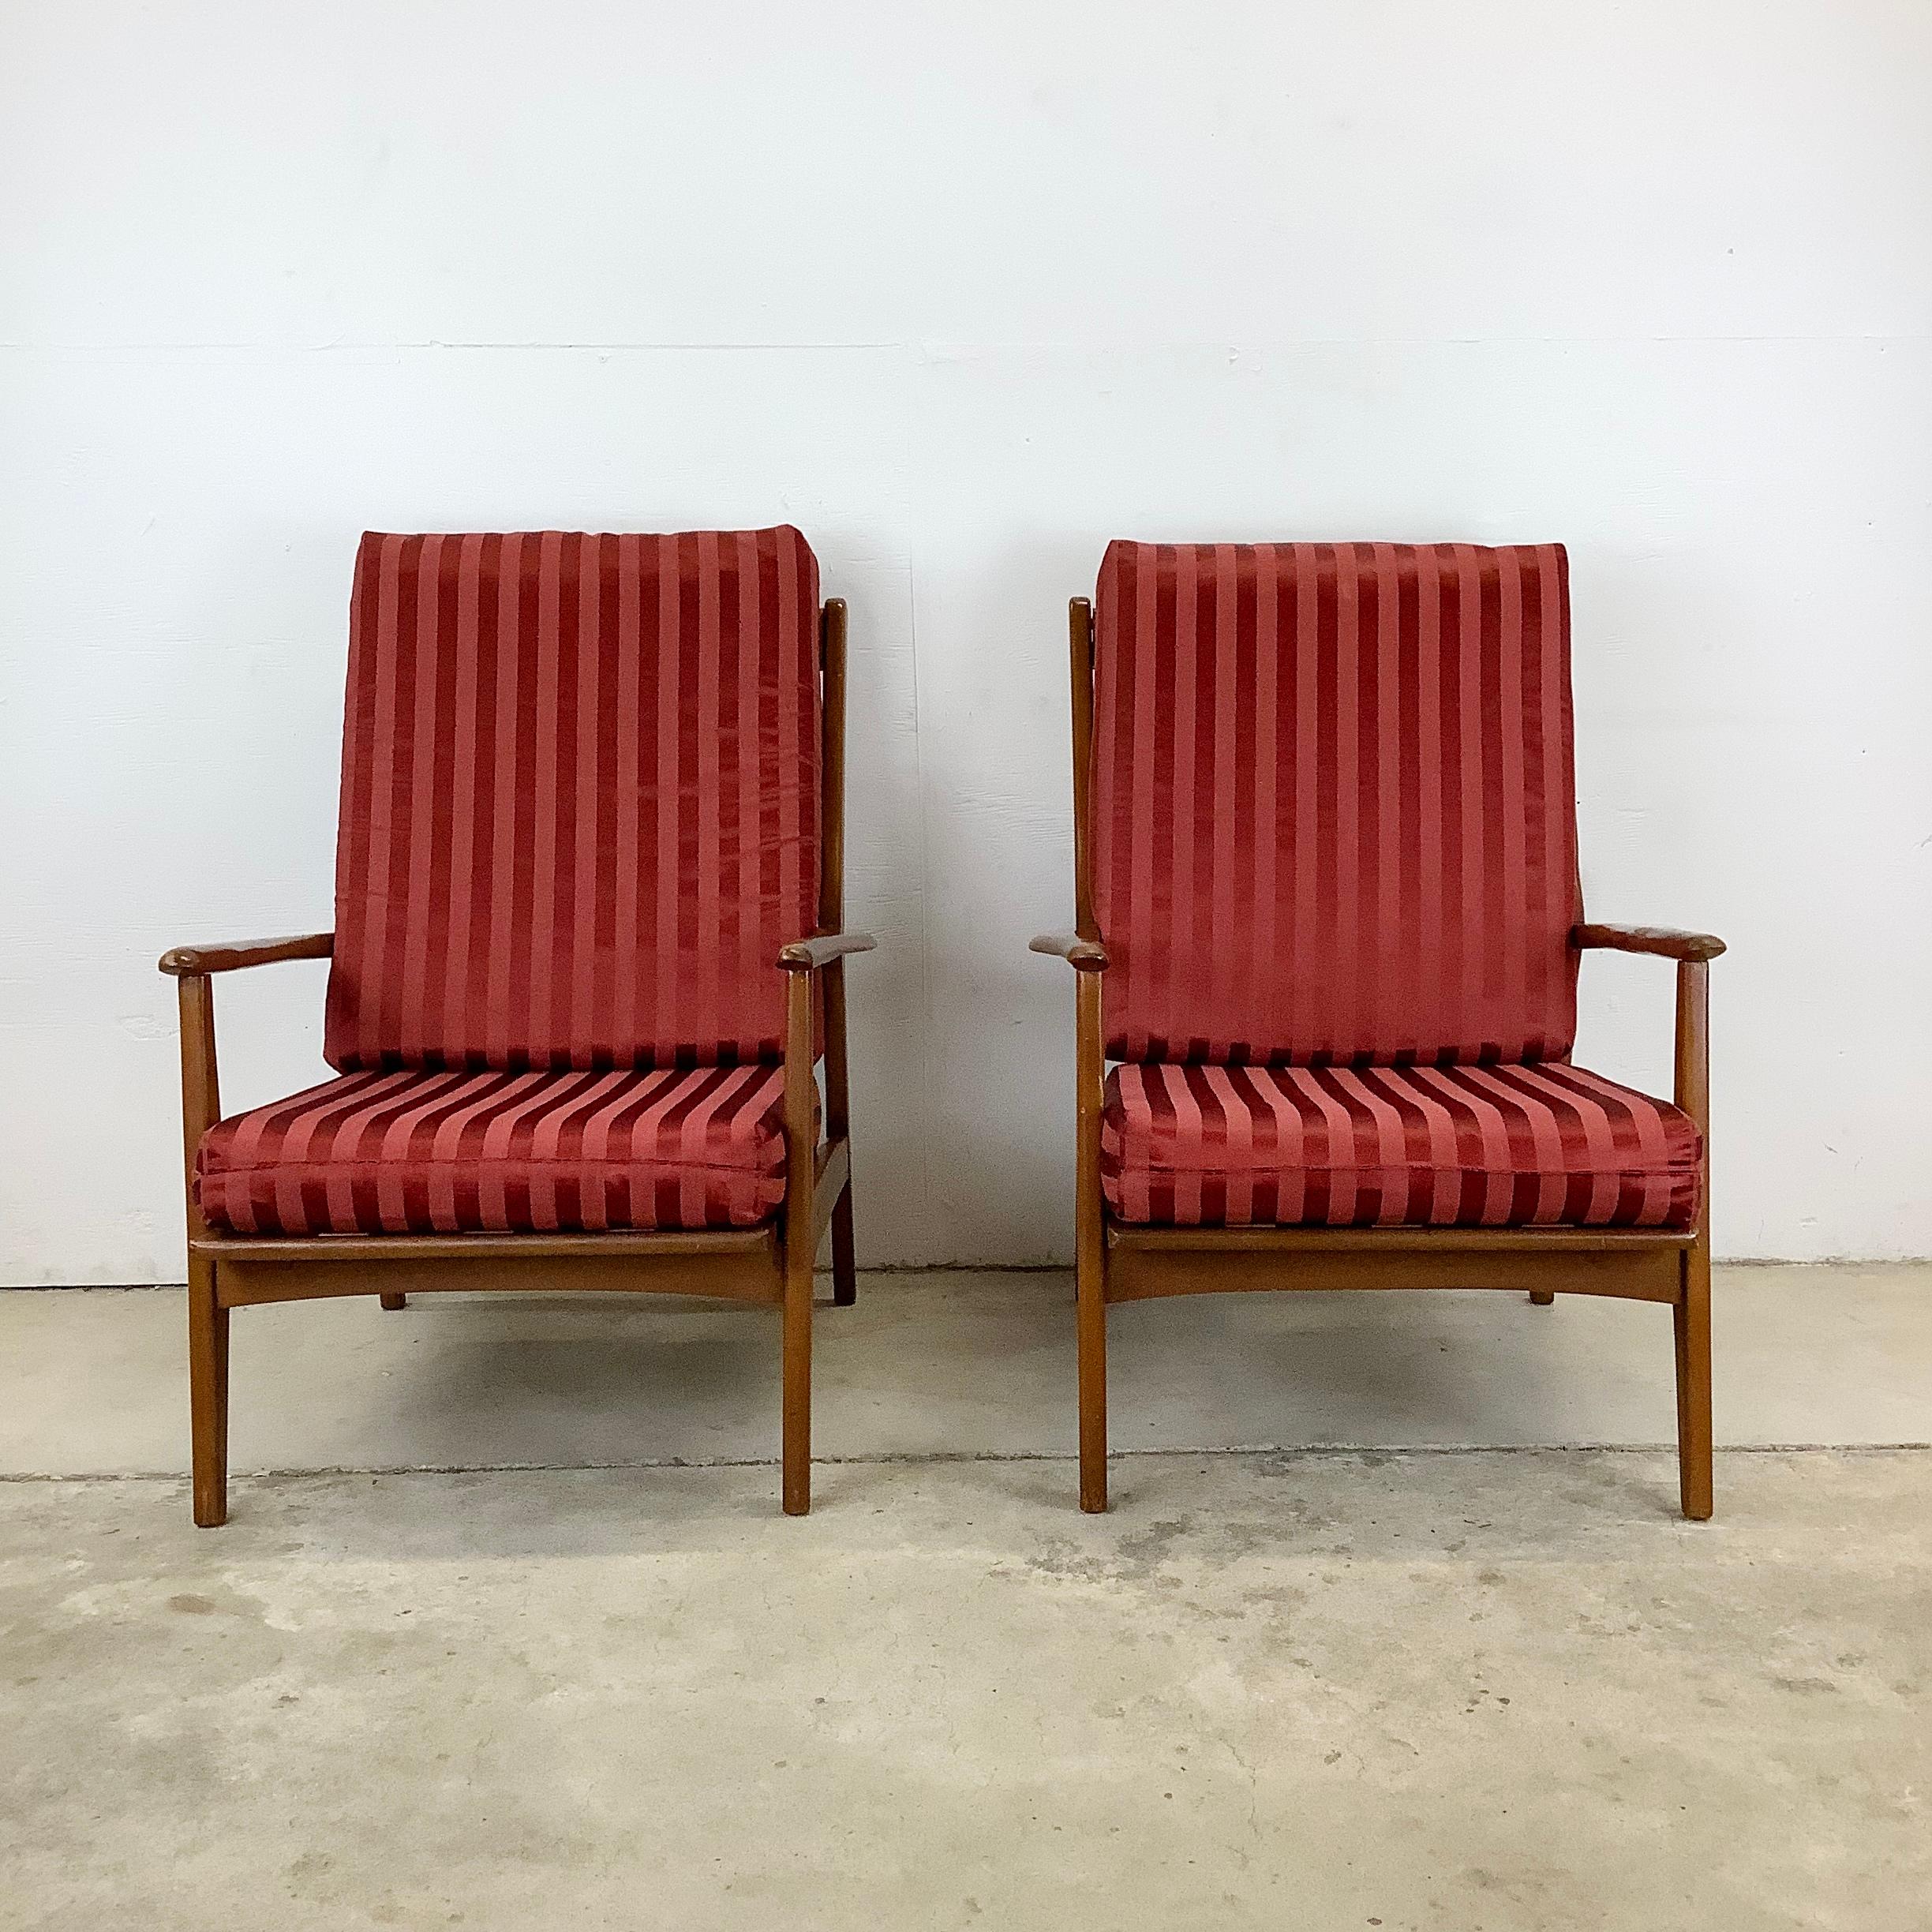 Introducing this pair of mid-century high-back walnut frame lounge chairs, an epitome of mcm elegance and comfort. These chairs, with their sleek walnut frames, feature removable seat and back cushions upholstered in a rich maroon red fabric,